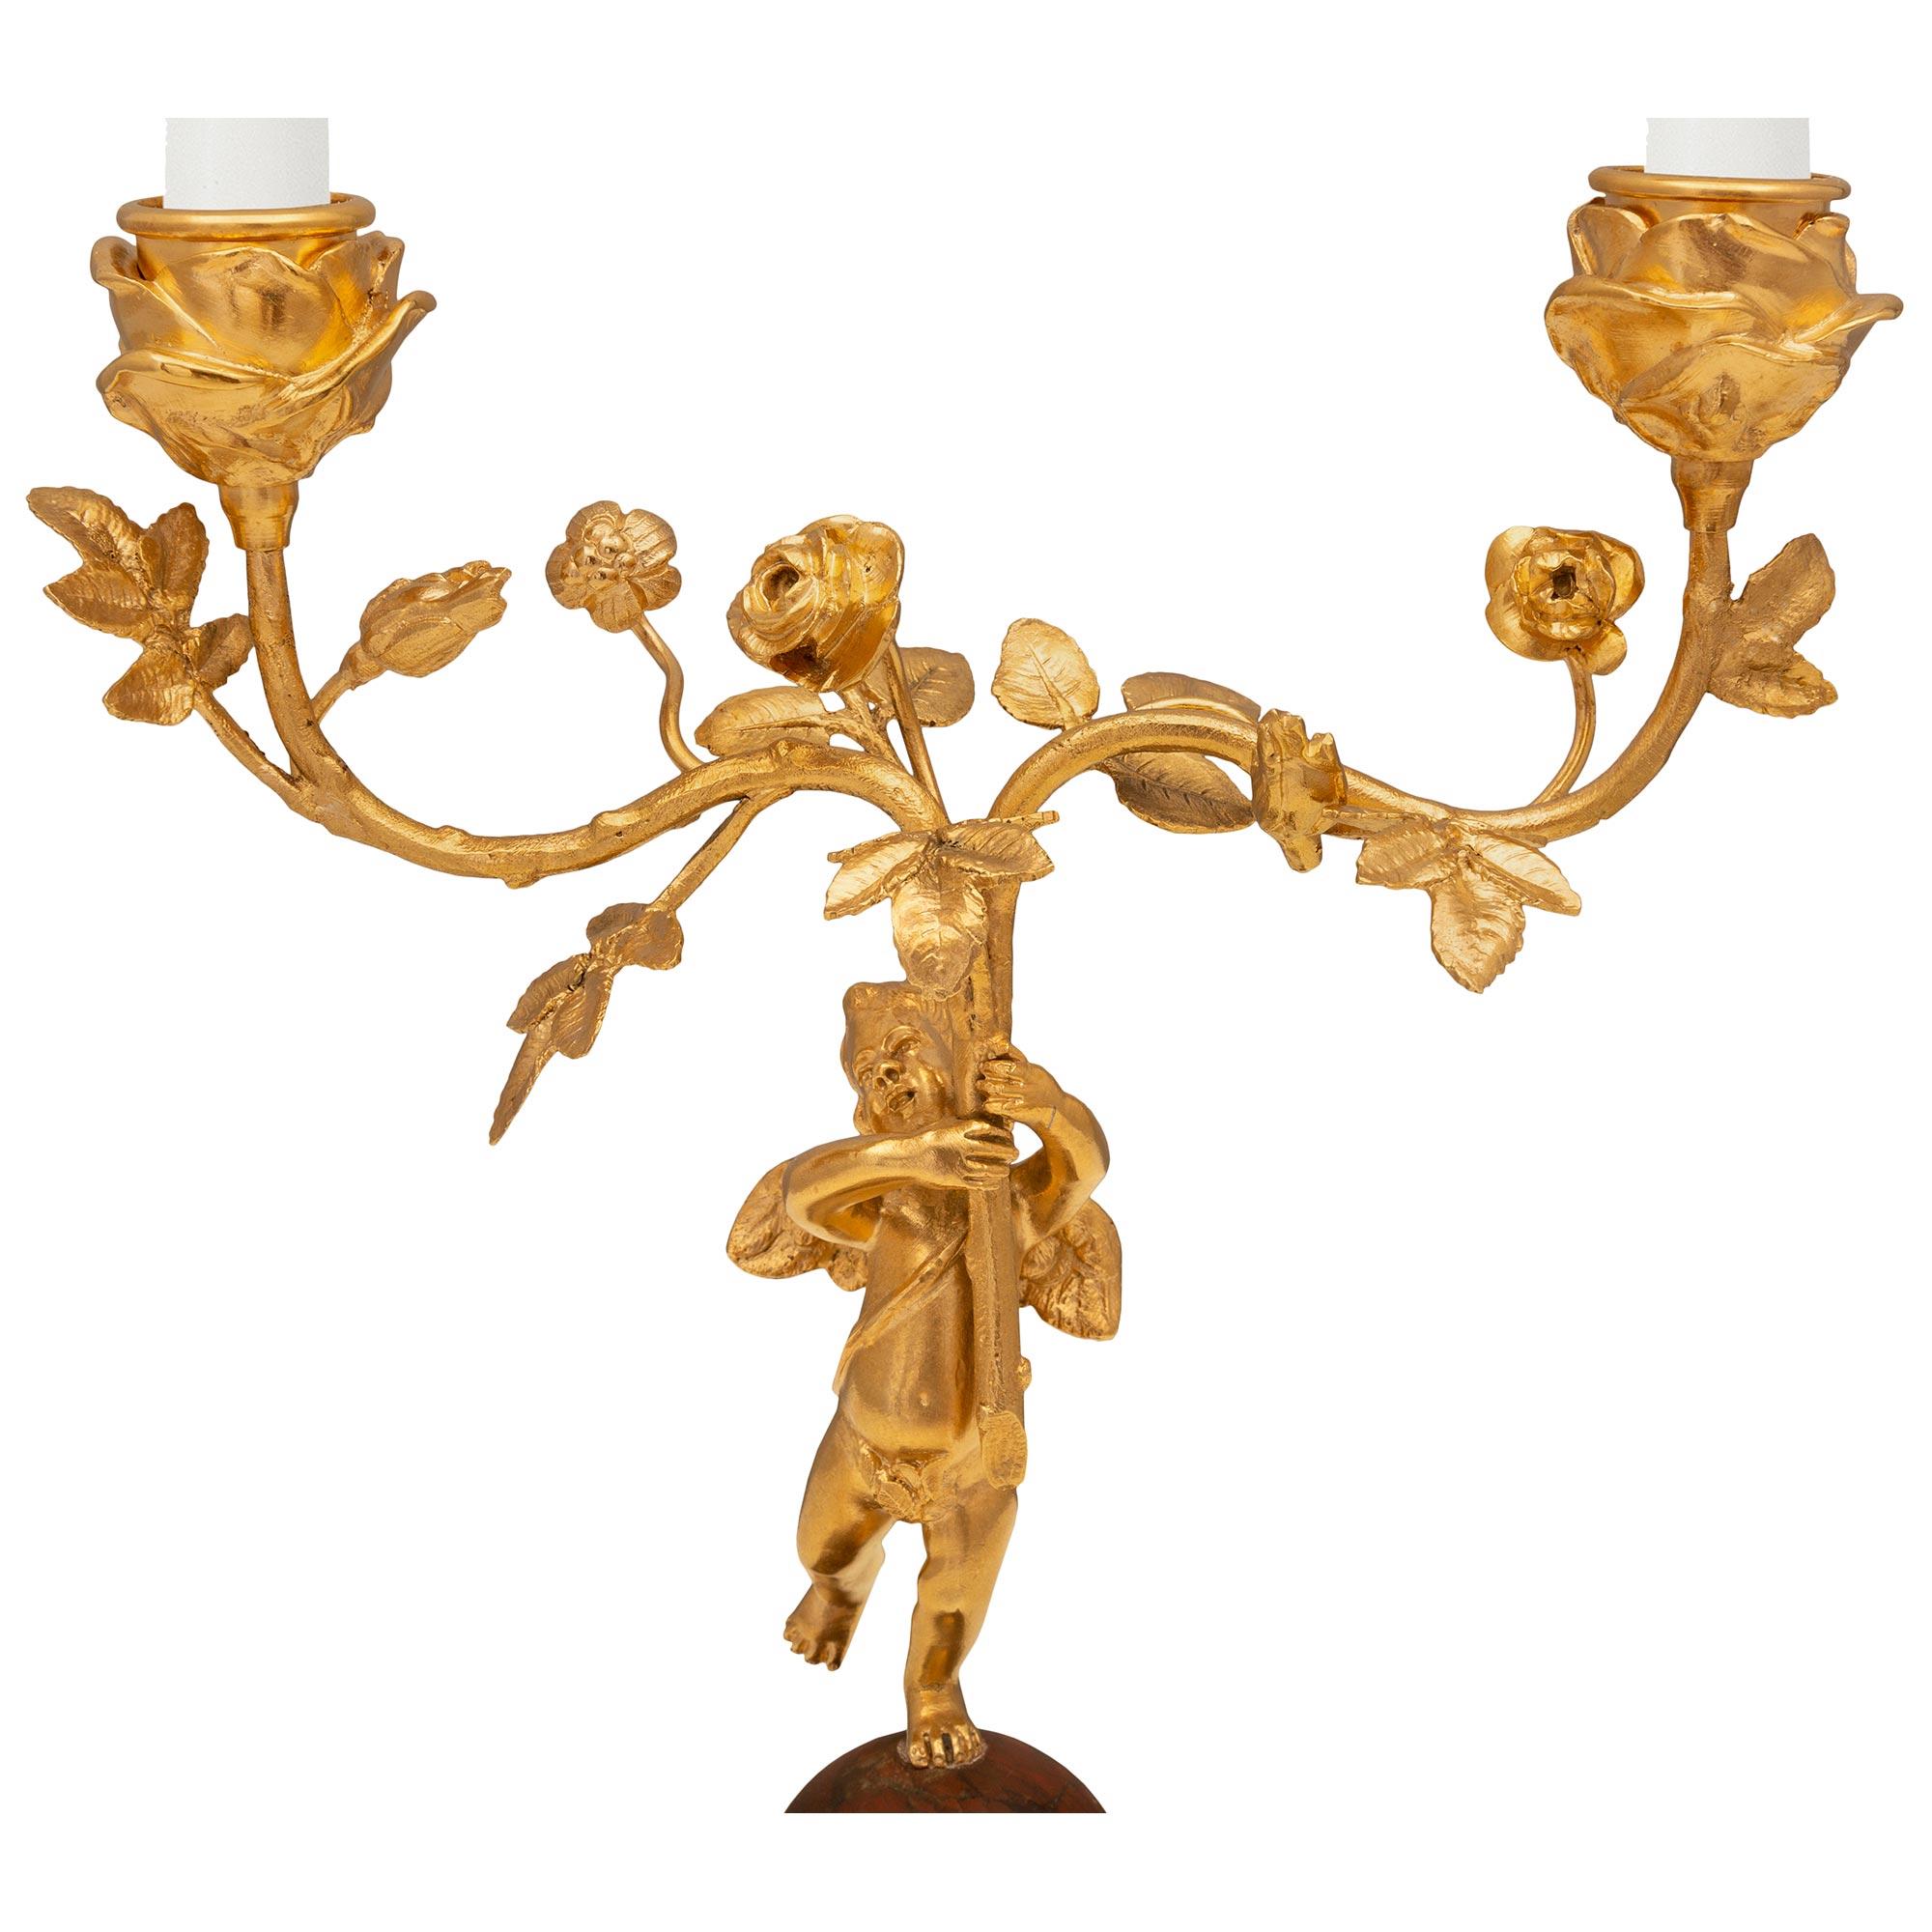 Pair of French 19th Century Elle Époque Period Ormolu and Marble Candelabras For Sale 2